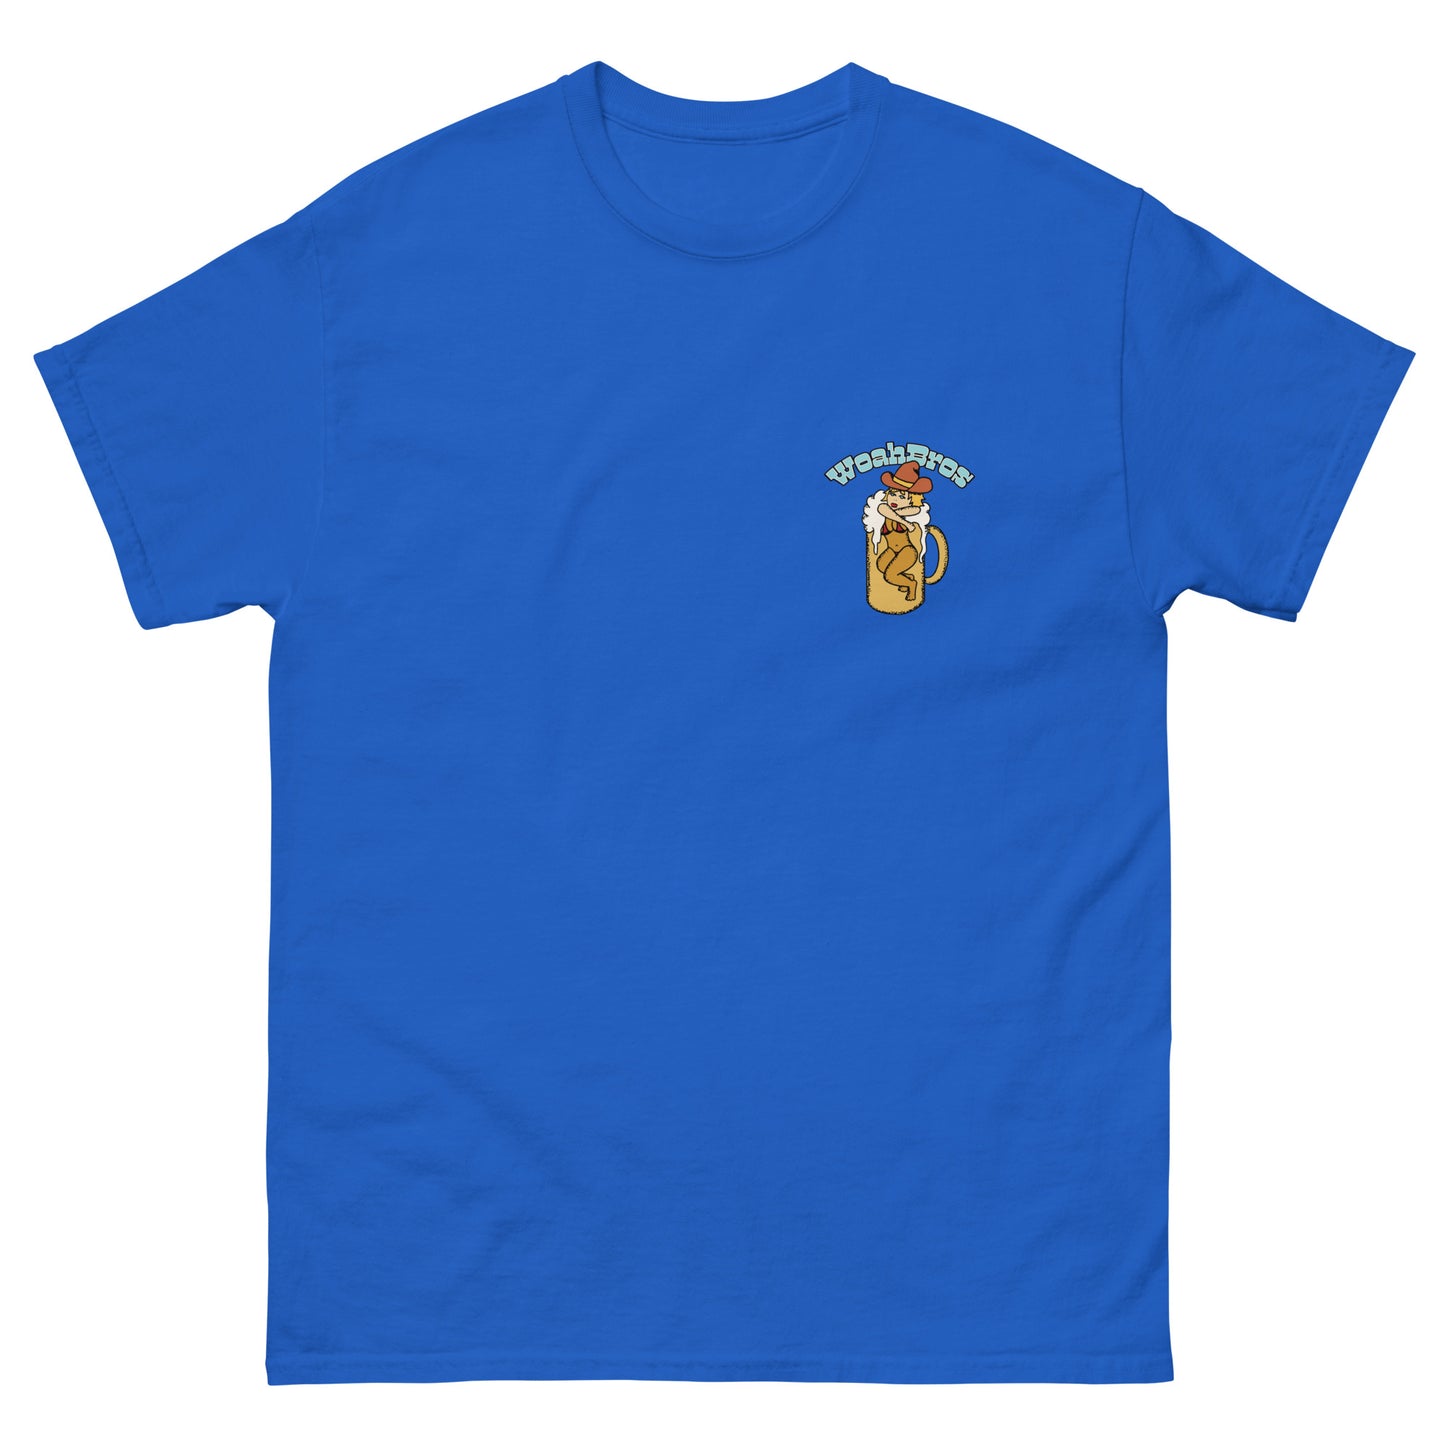 Beers and Babes Tee